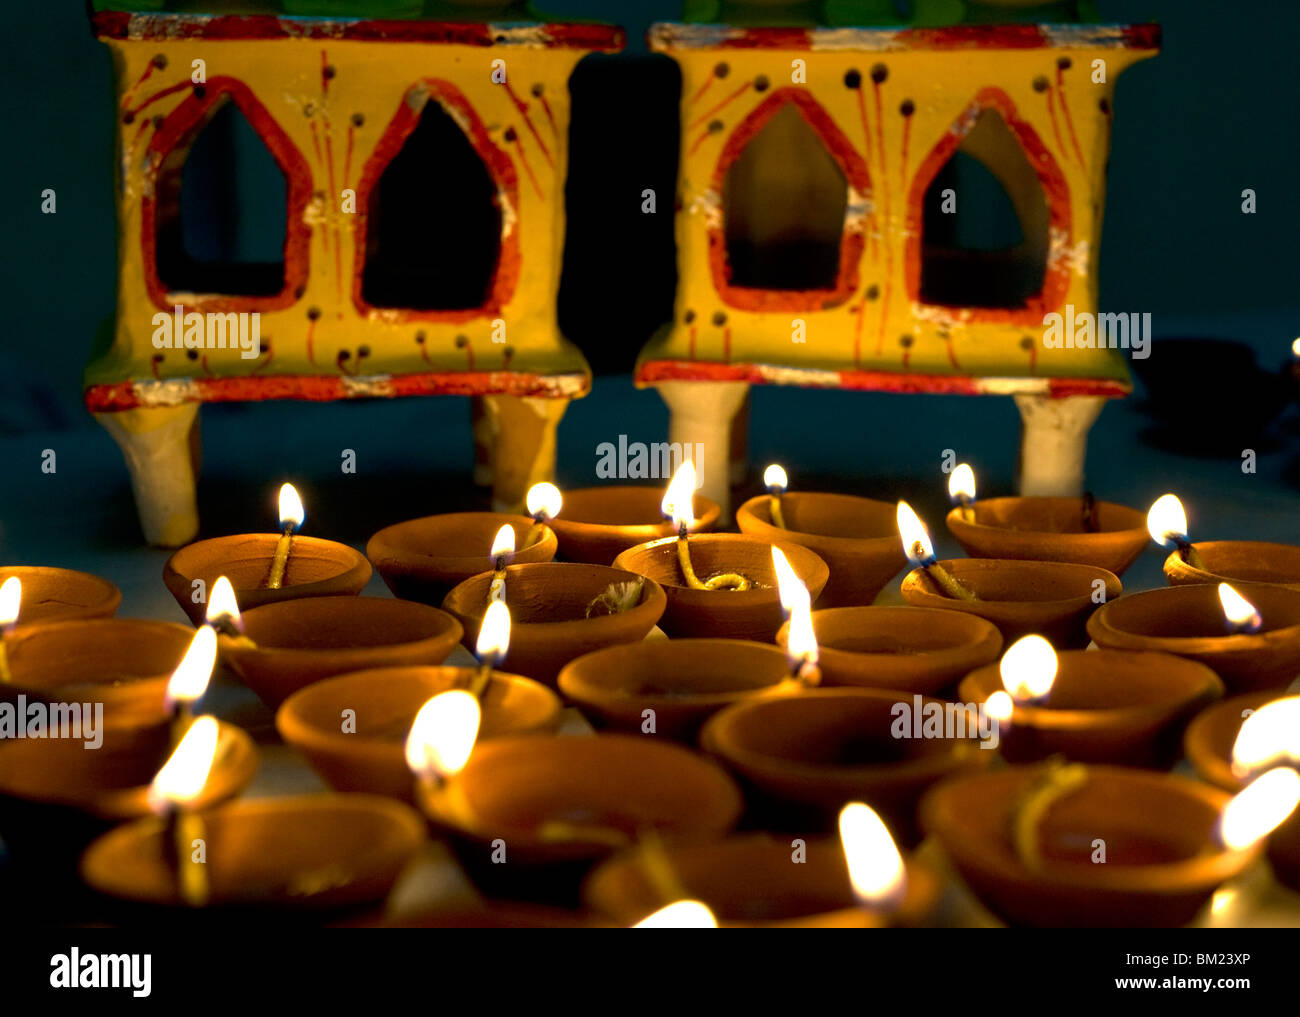 Diwali deepak lights (oil and cotton wick candles) and shrine decorations, India, Asia Stock Photo